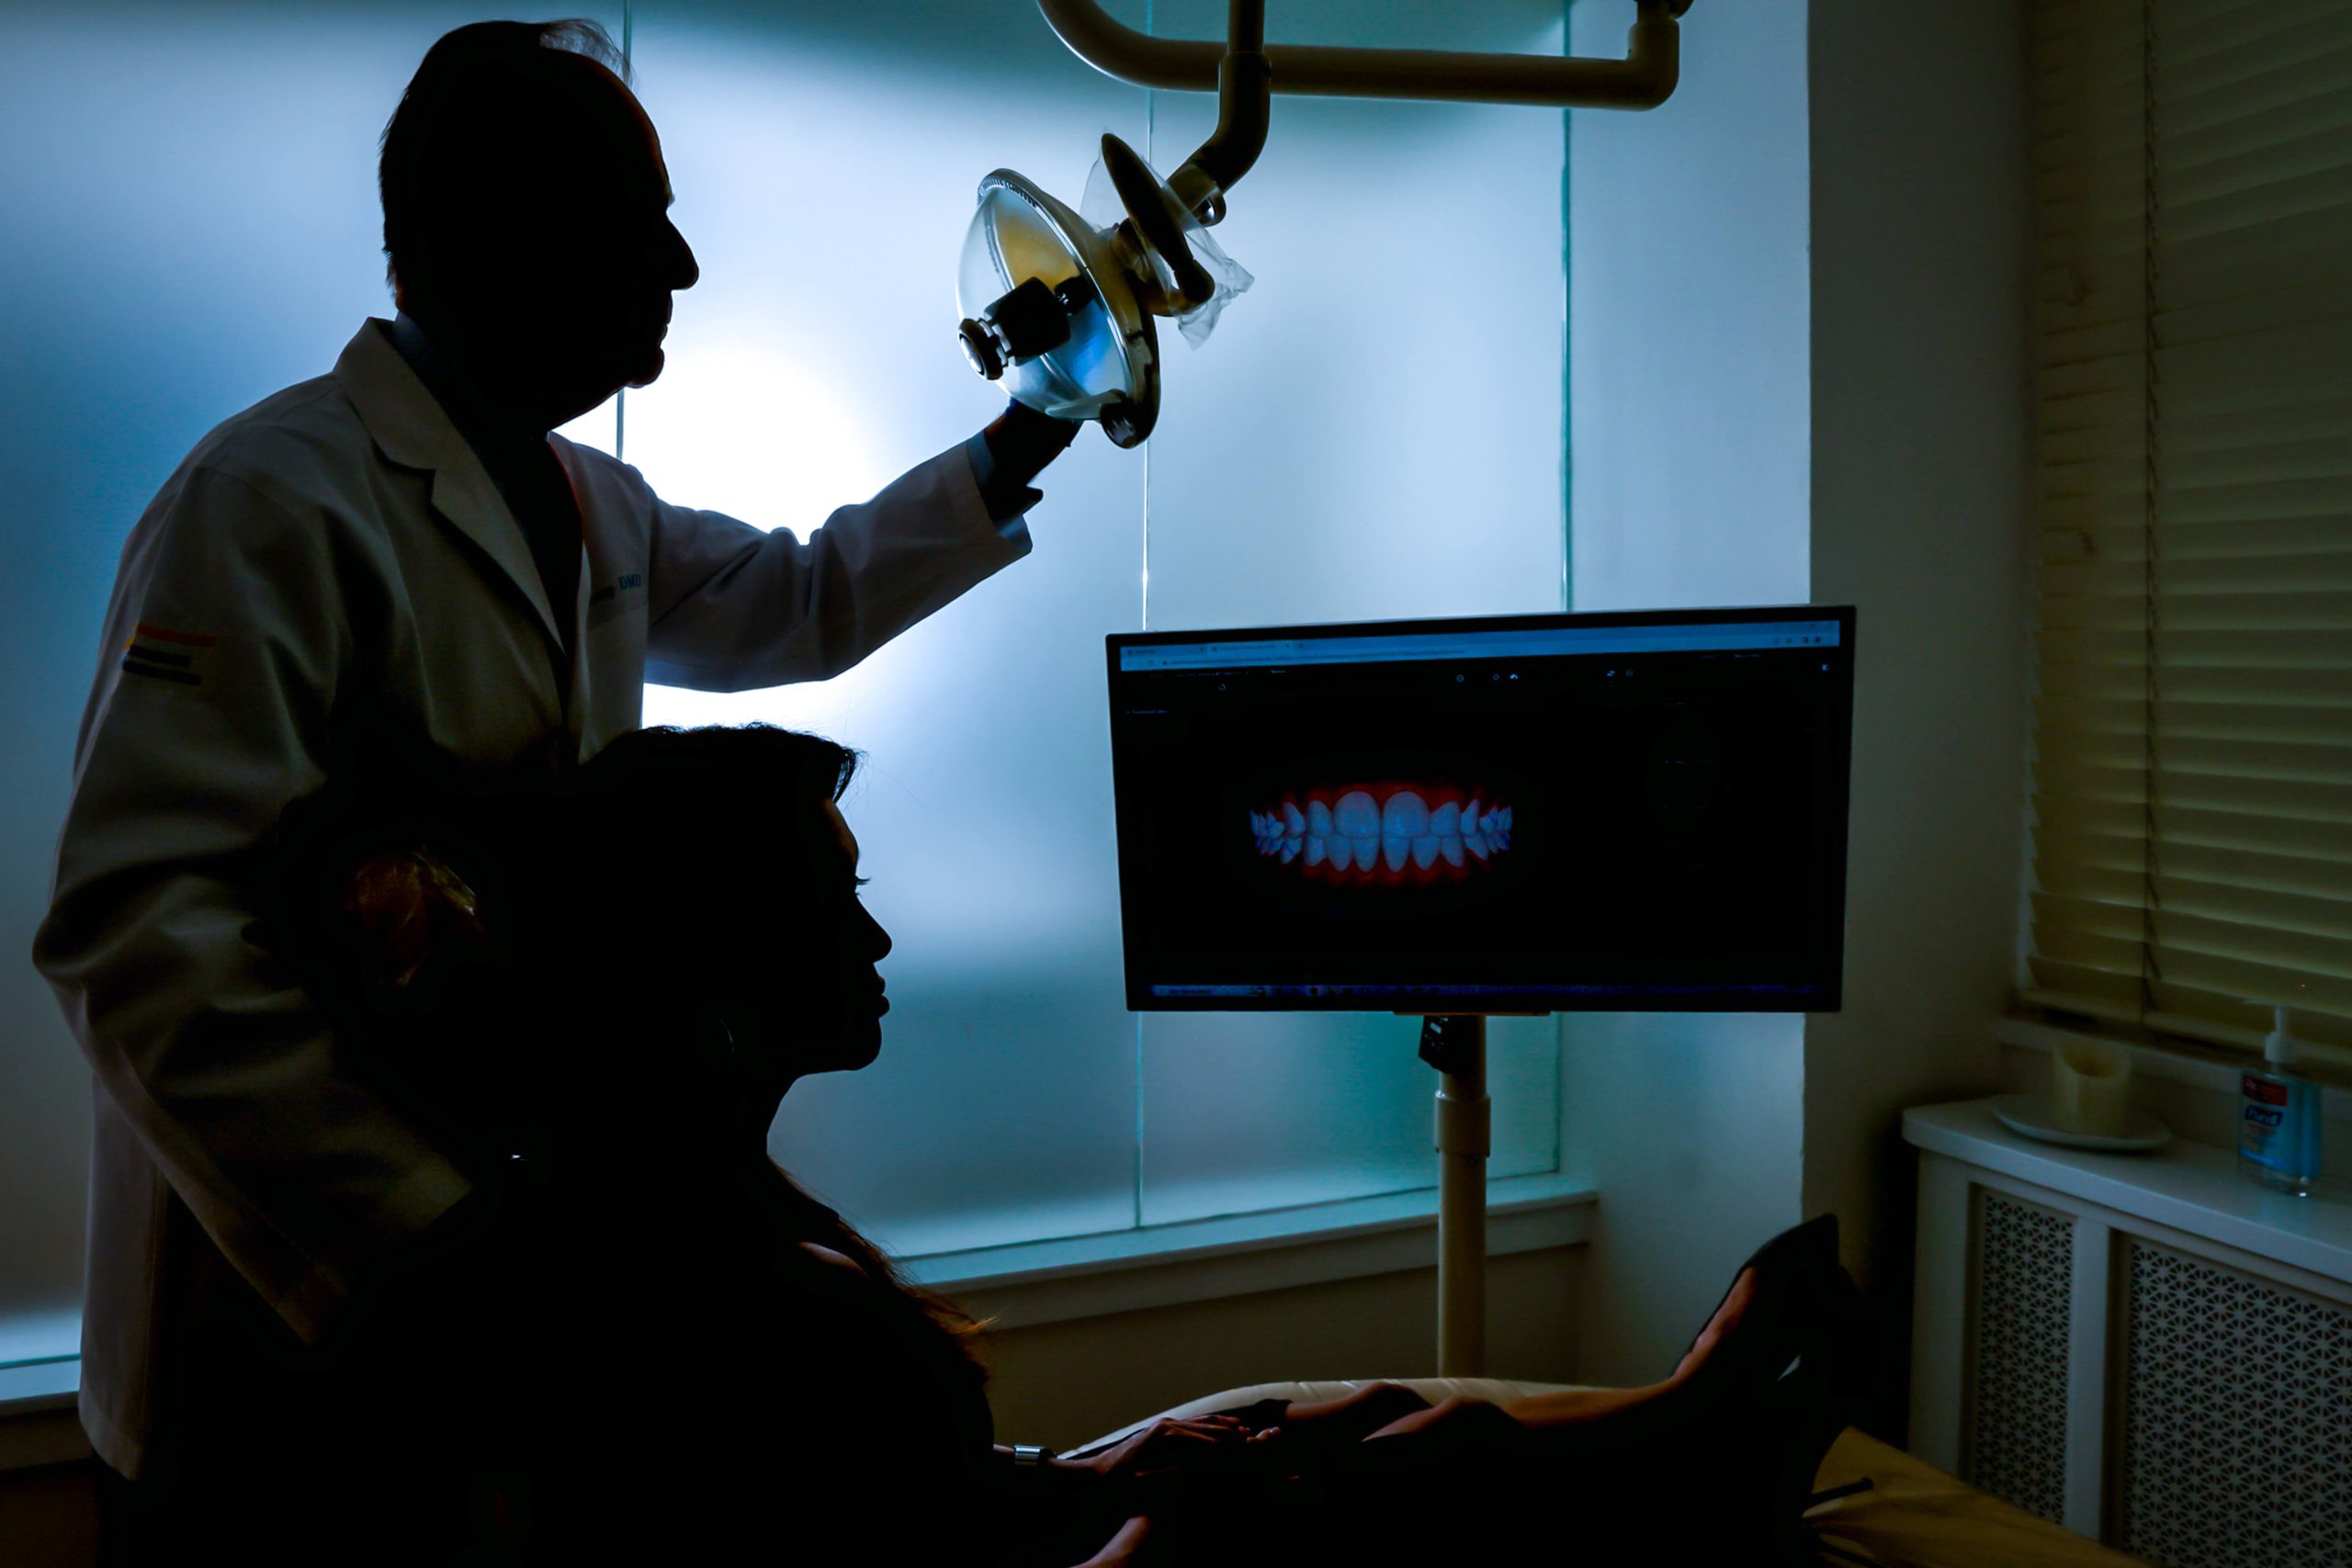 dentist in dark room with monitor and surgical light